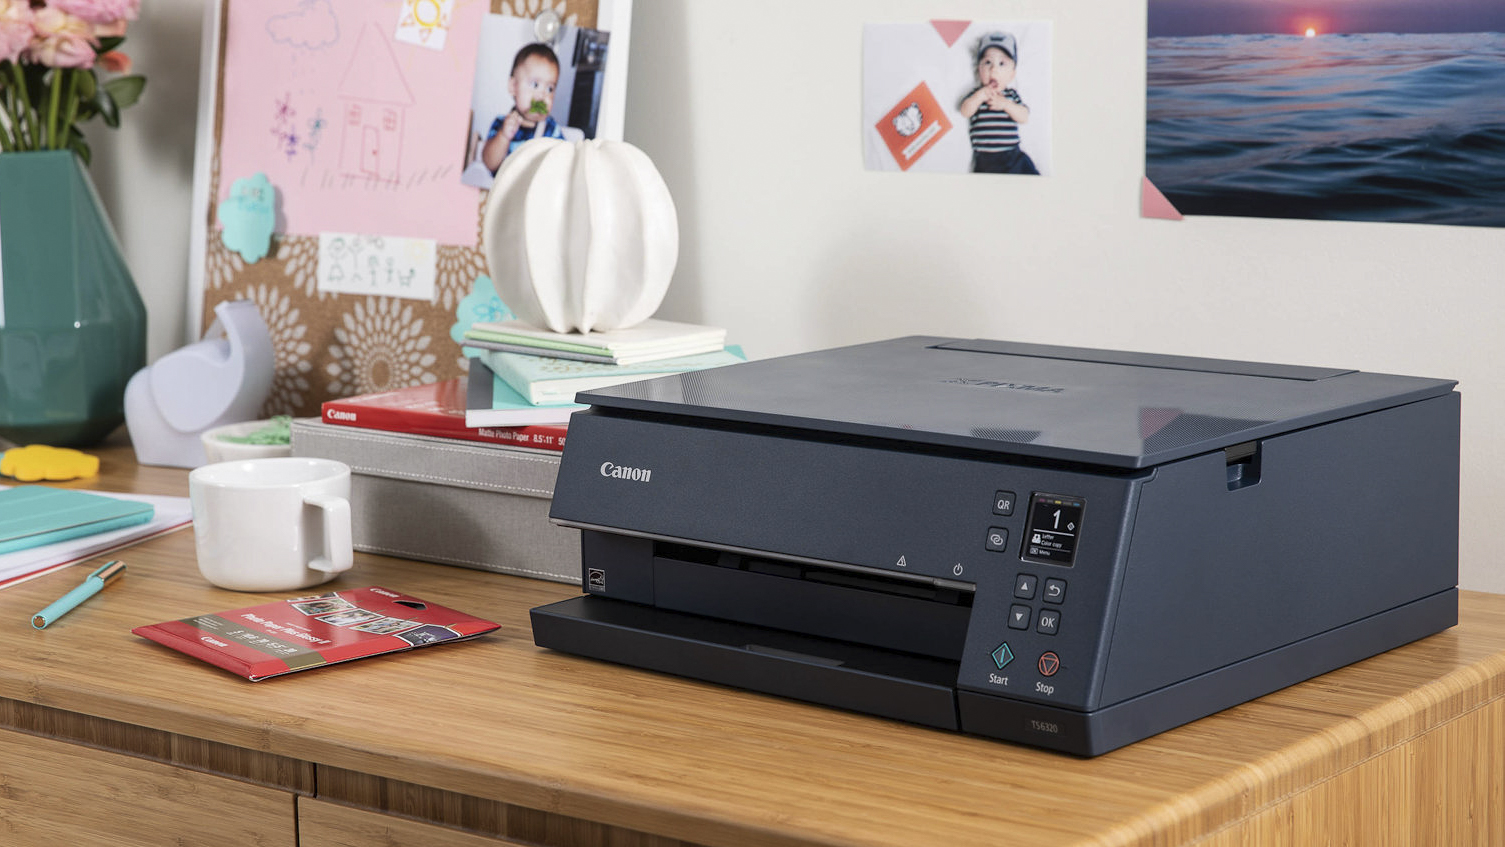 Product shot of the Canon Pixma TS6350, one of the best all-in-one printers